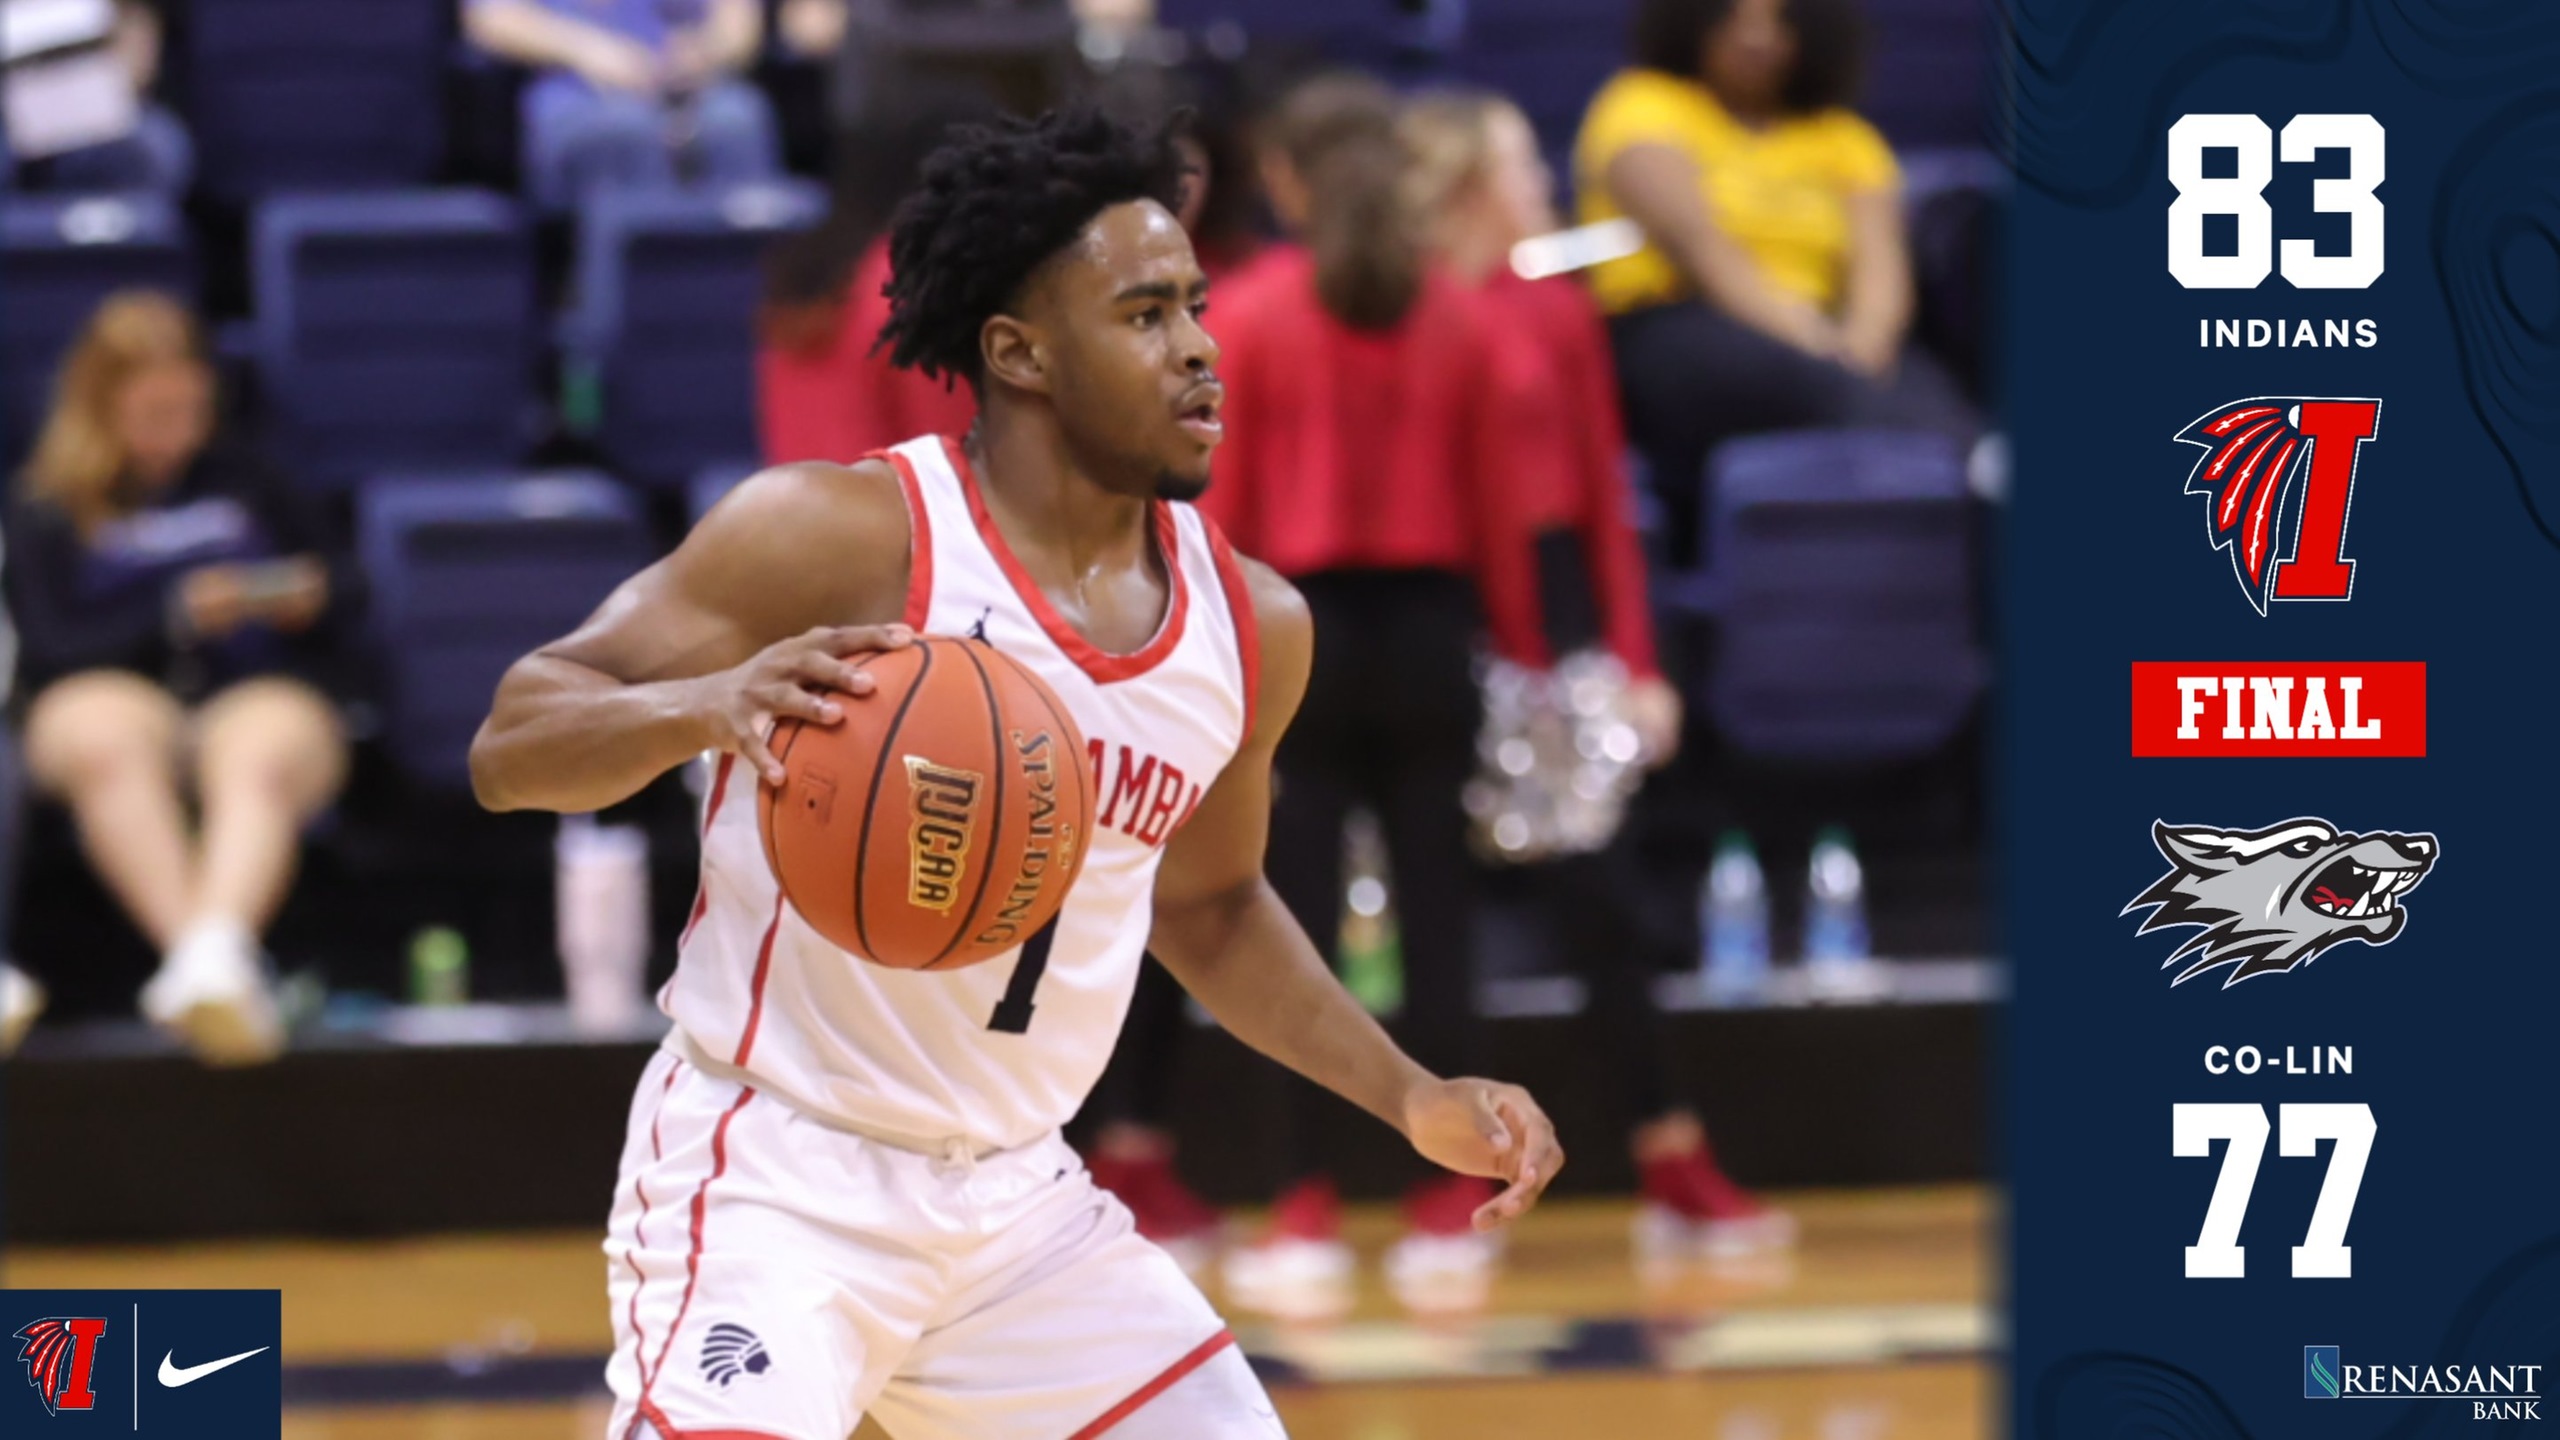 Indians defeat Co-Lin on Sophomore Night, 83-77